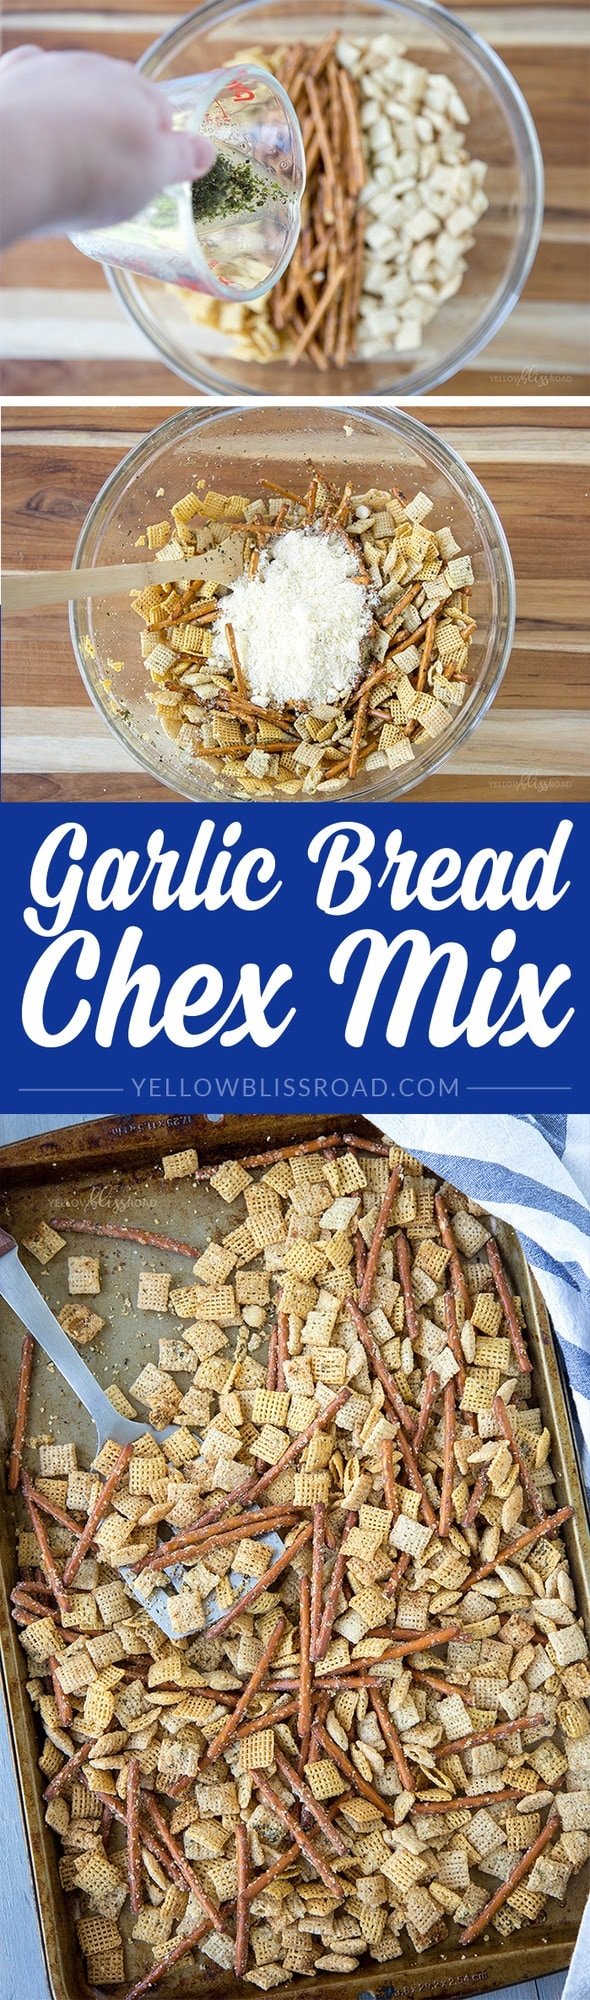 Garlic Bread Chex Mix - A delicious snack made with Chex cereal, Garlic, Basil and Parmesan